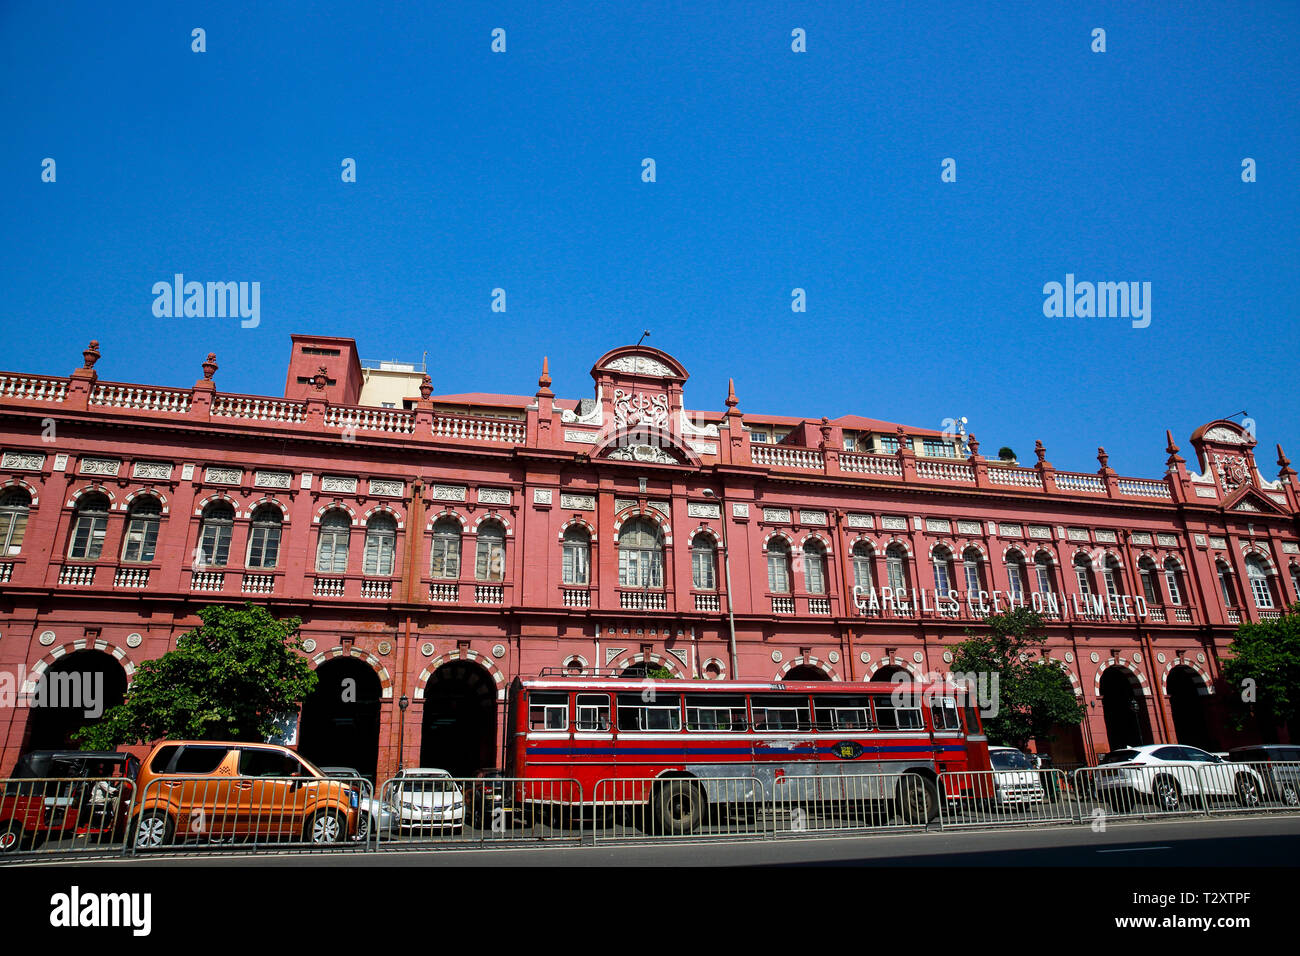 The historic estate of Cargills and Miller Company, located in York Street in Colombo. Sri Lanka Stock Photo